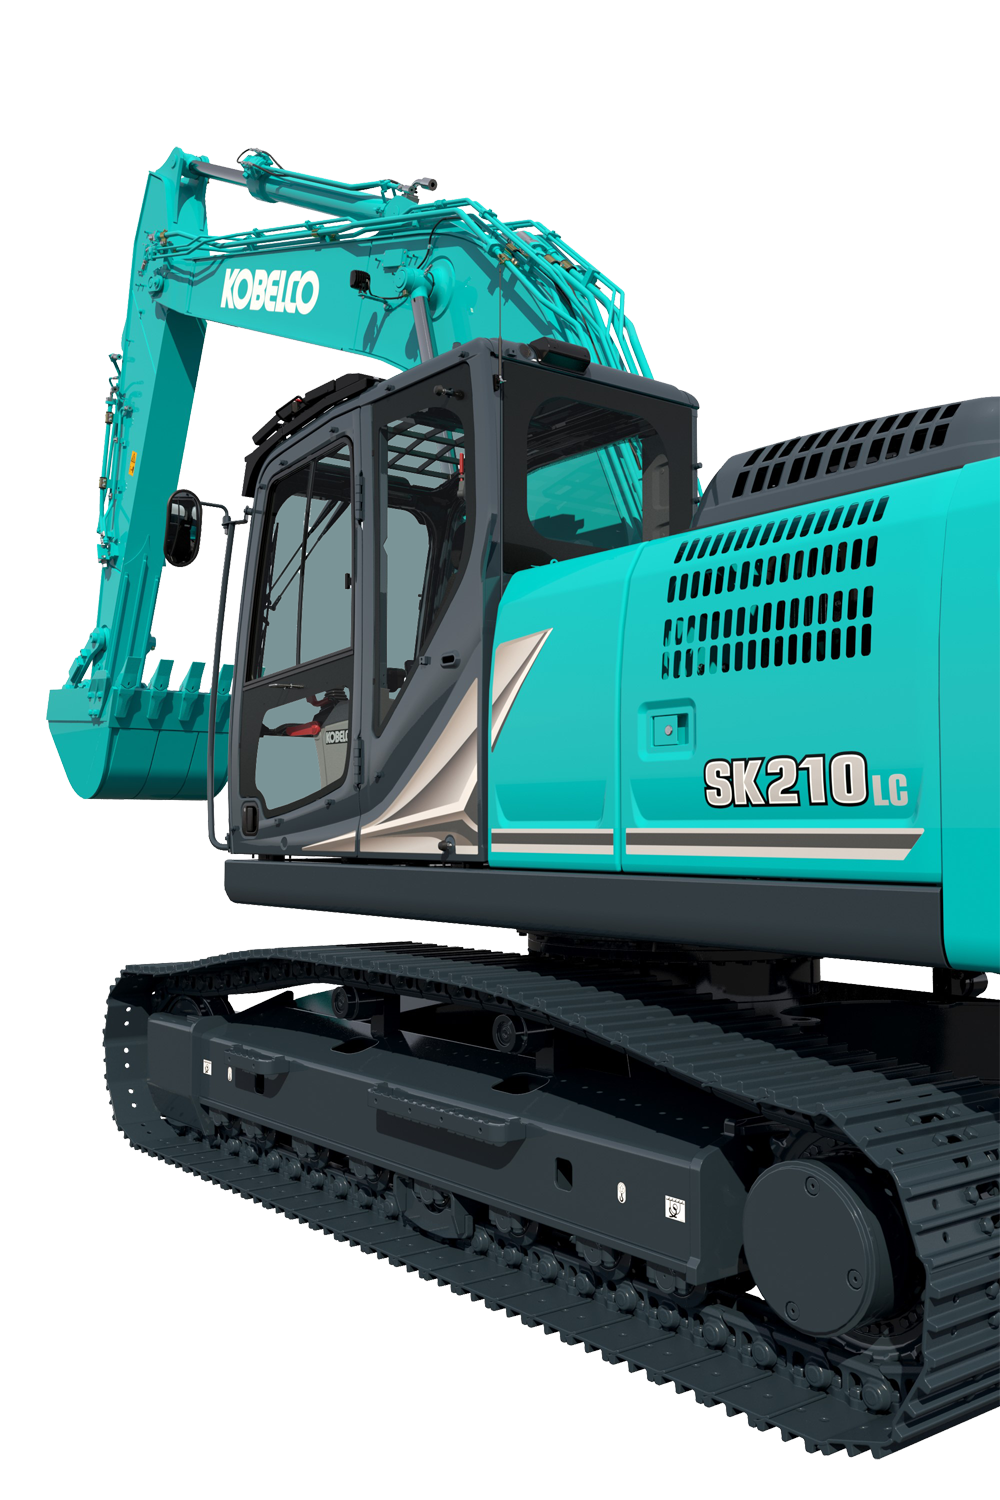 Kobelco says its new excavator targets performance for this important size class